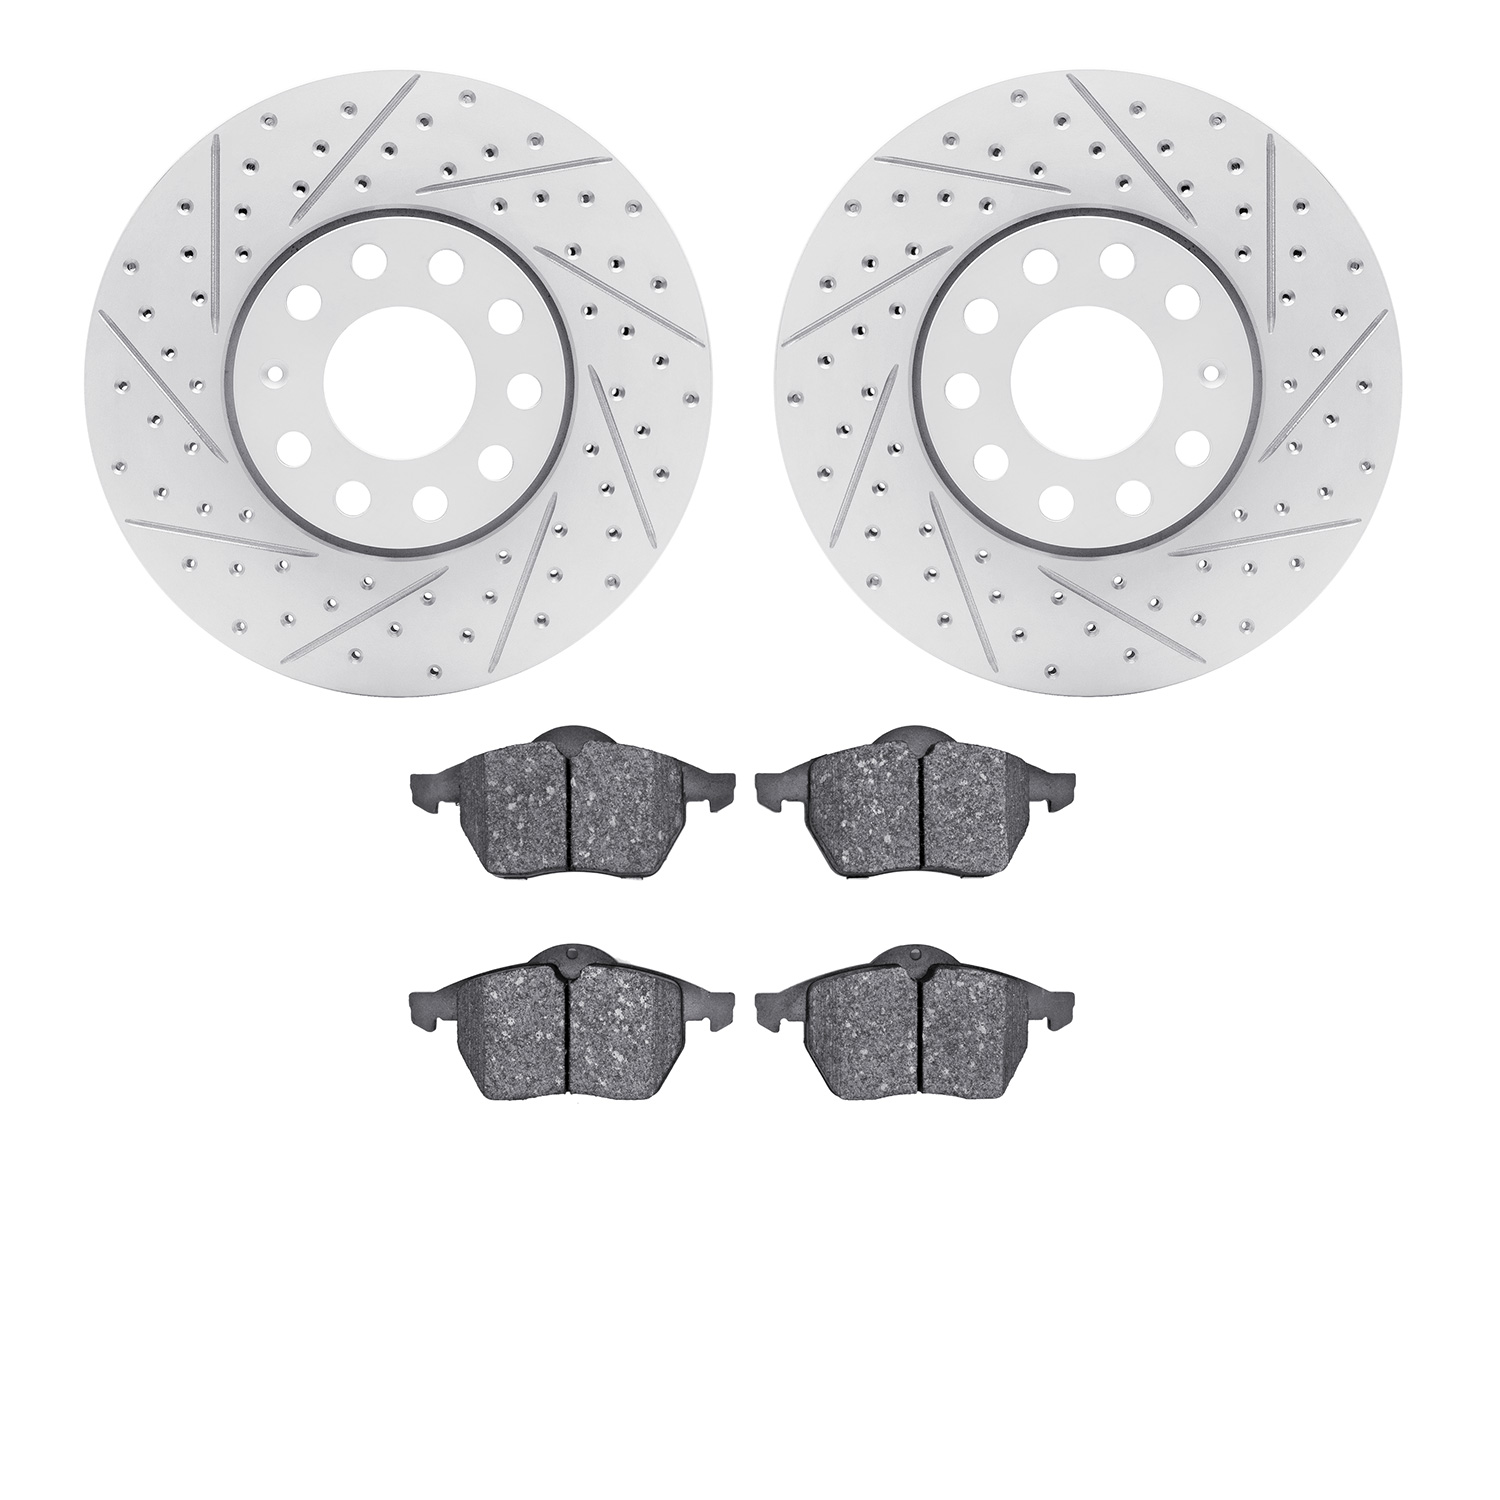 2502-73034 Geoperformance Drilled/Slotted Rotors w/5000 Advanced Brake Pads Kit, 1996-1999 Audi/Volkswagen, Position: Front